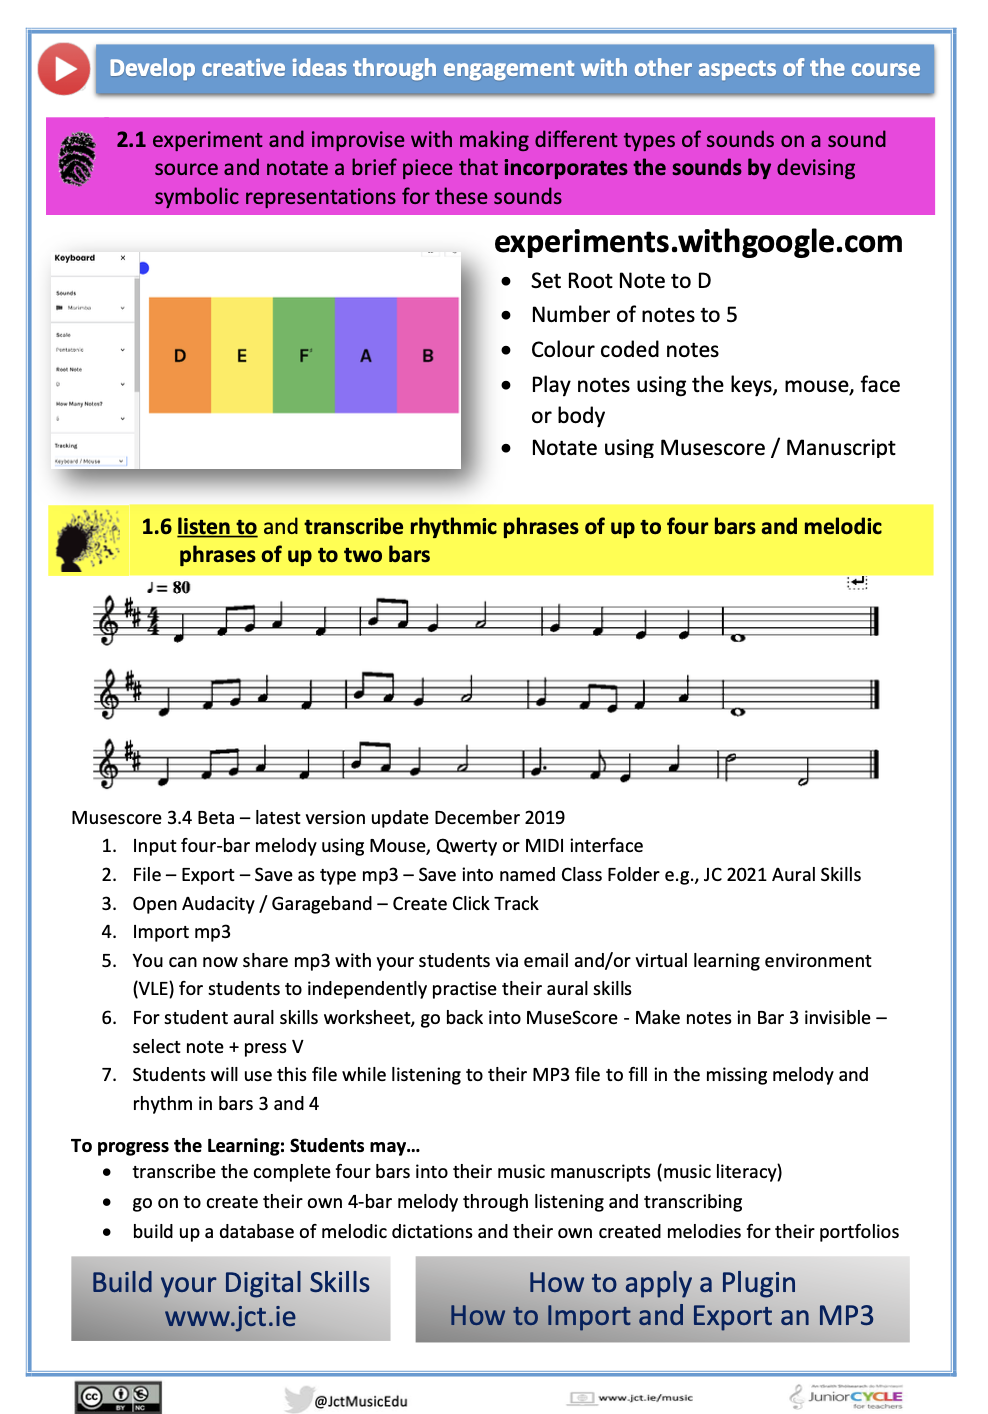 Create through engaging with Pentatonic and Aural Skills